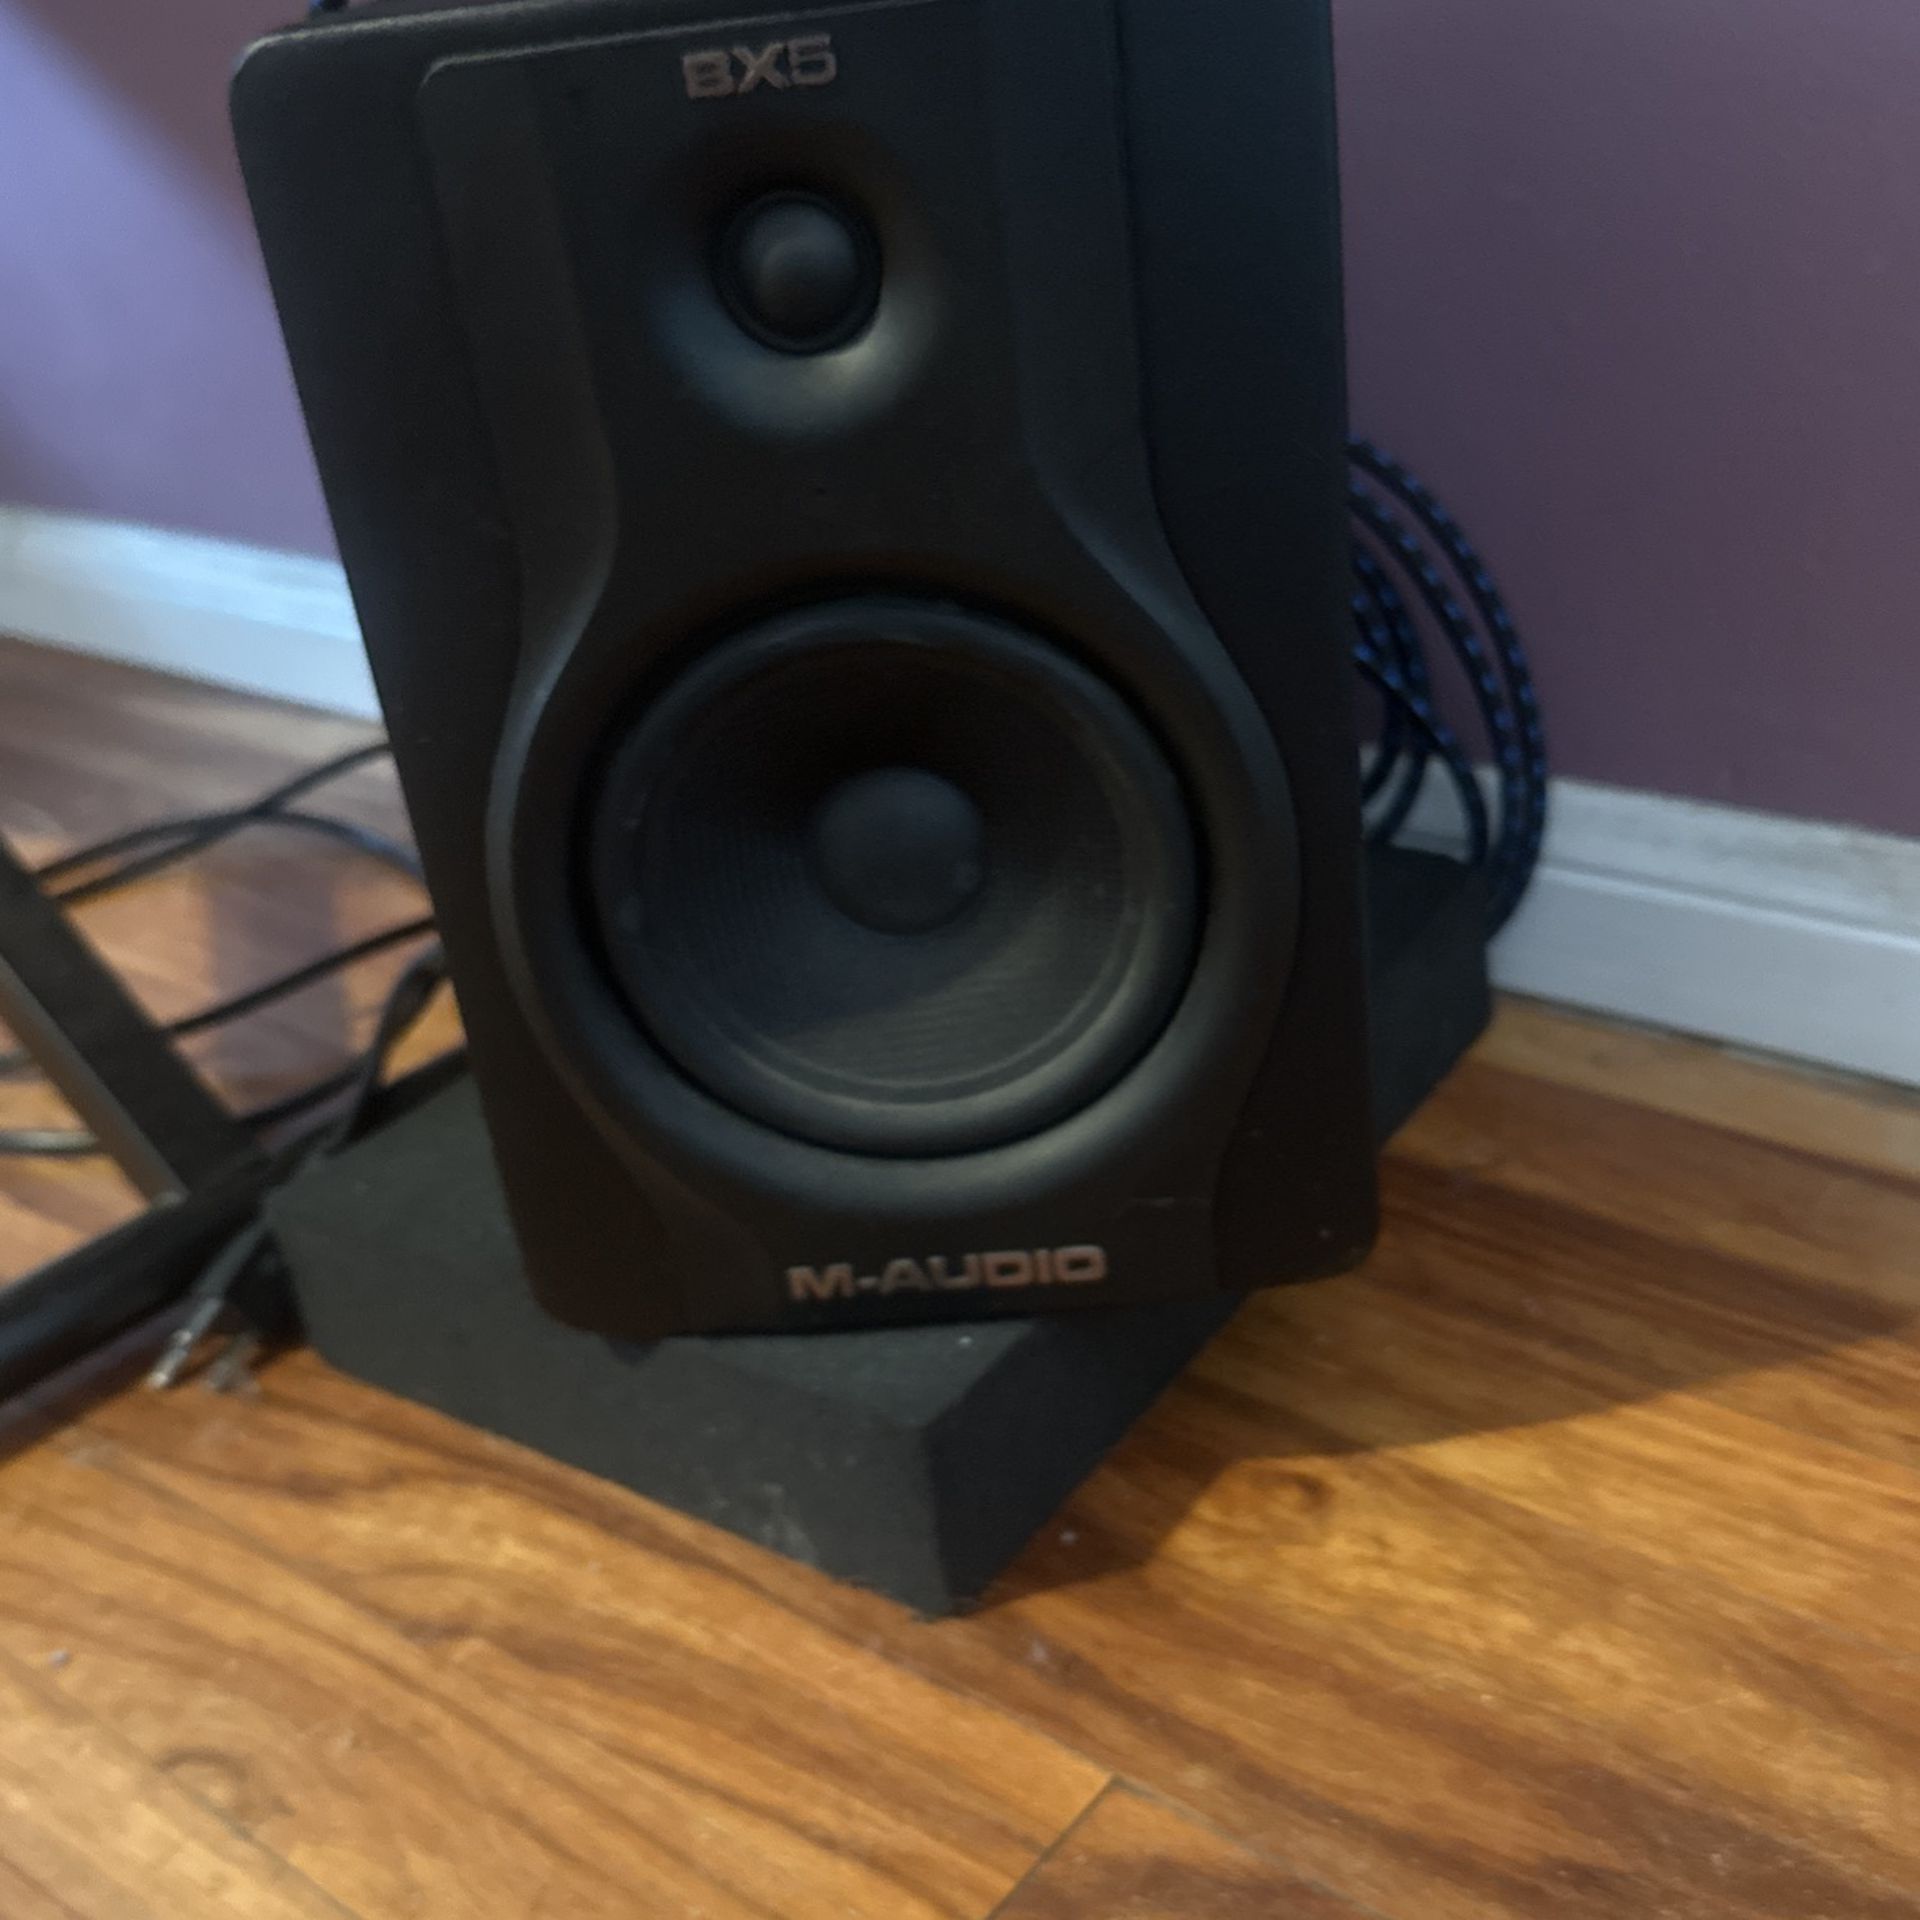 BX5 M- Audio speakers  (This is available )